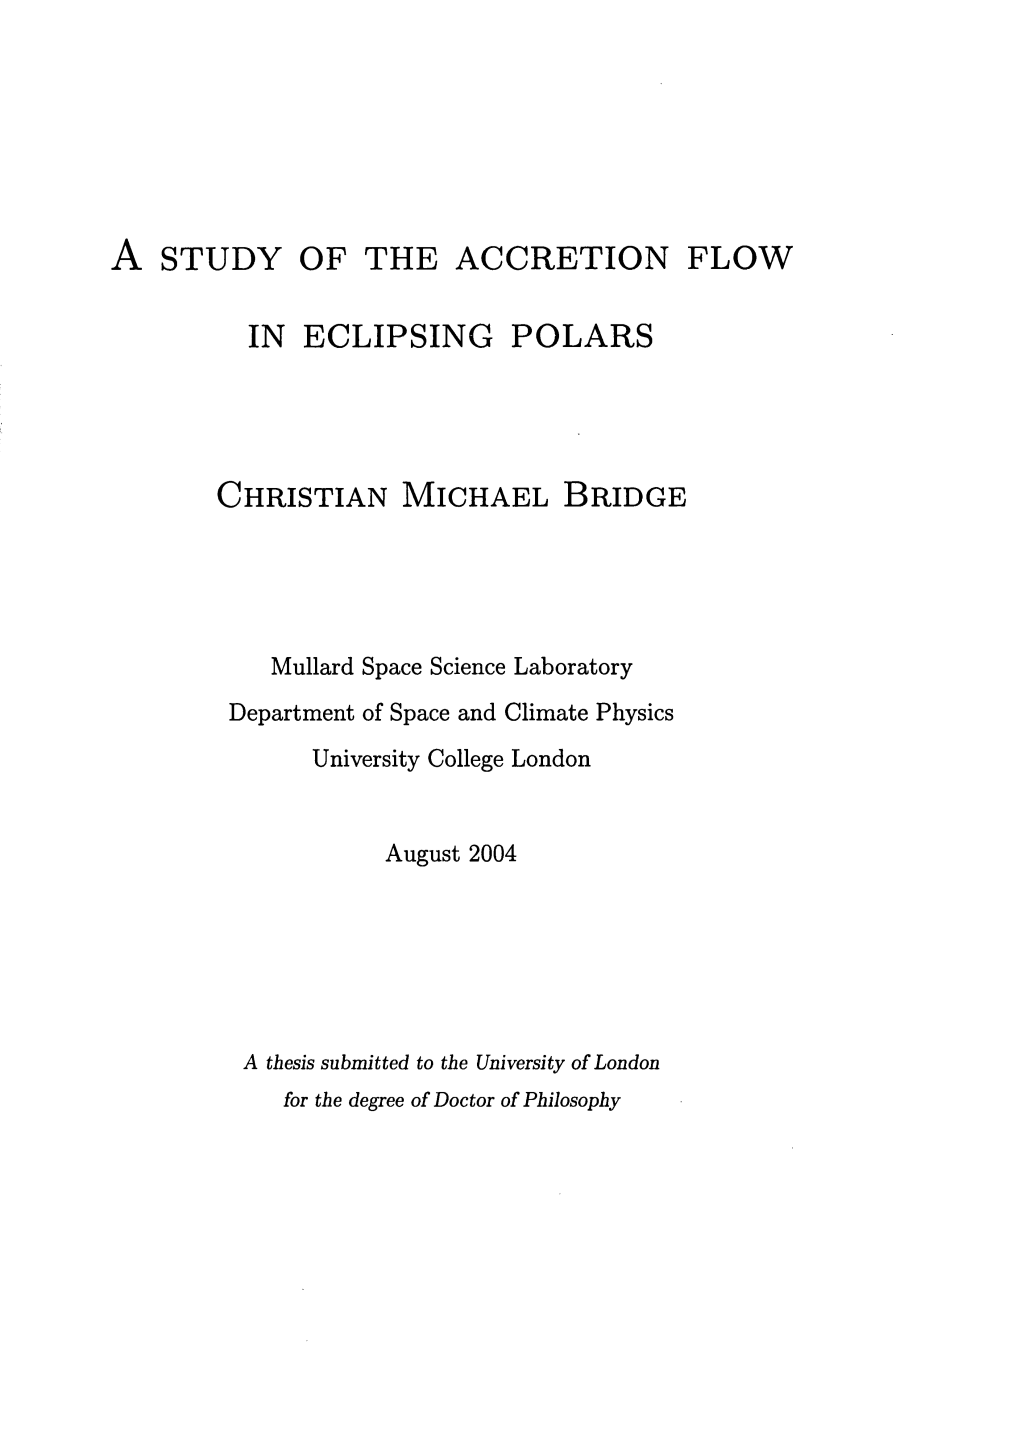 Study of the Accretion Flow in Eclipsing Polars